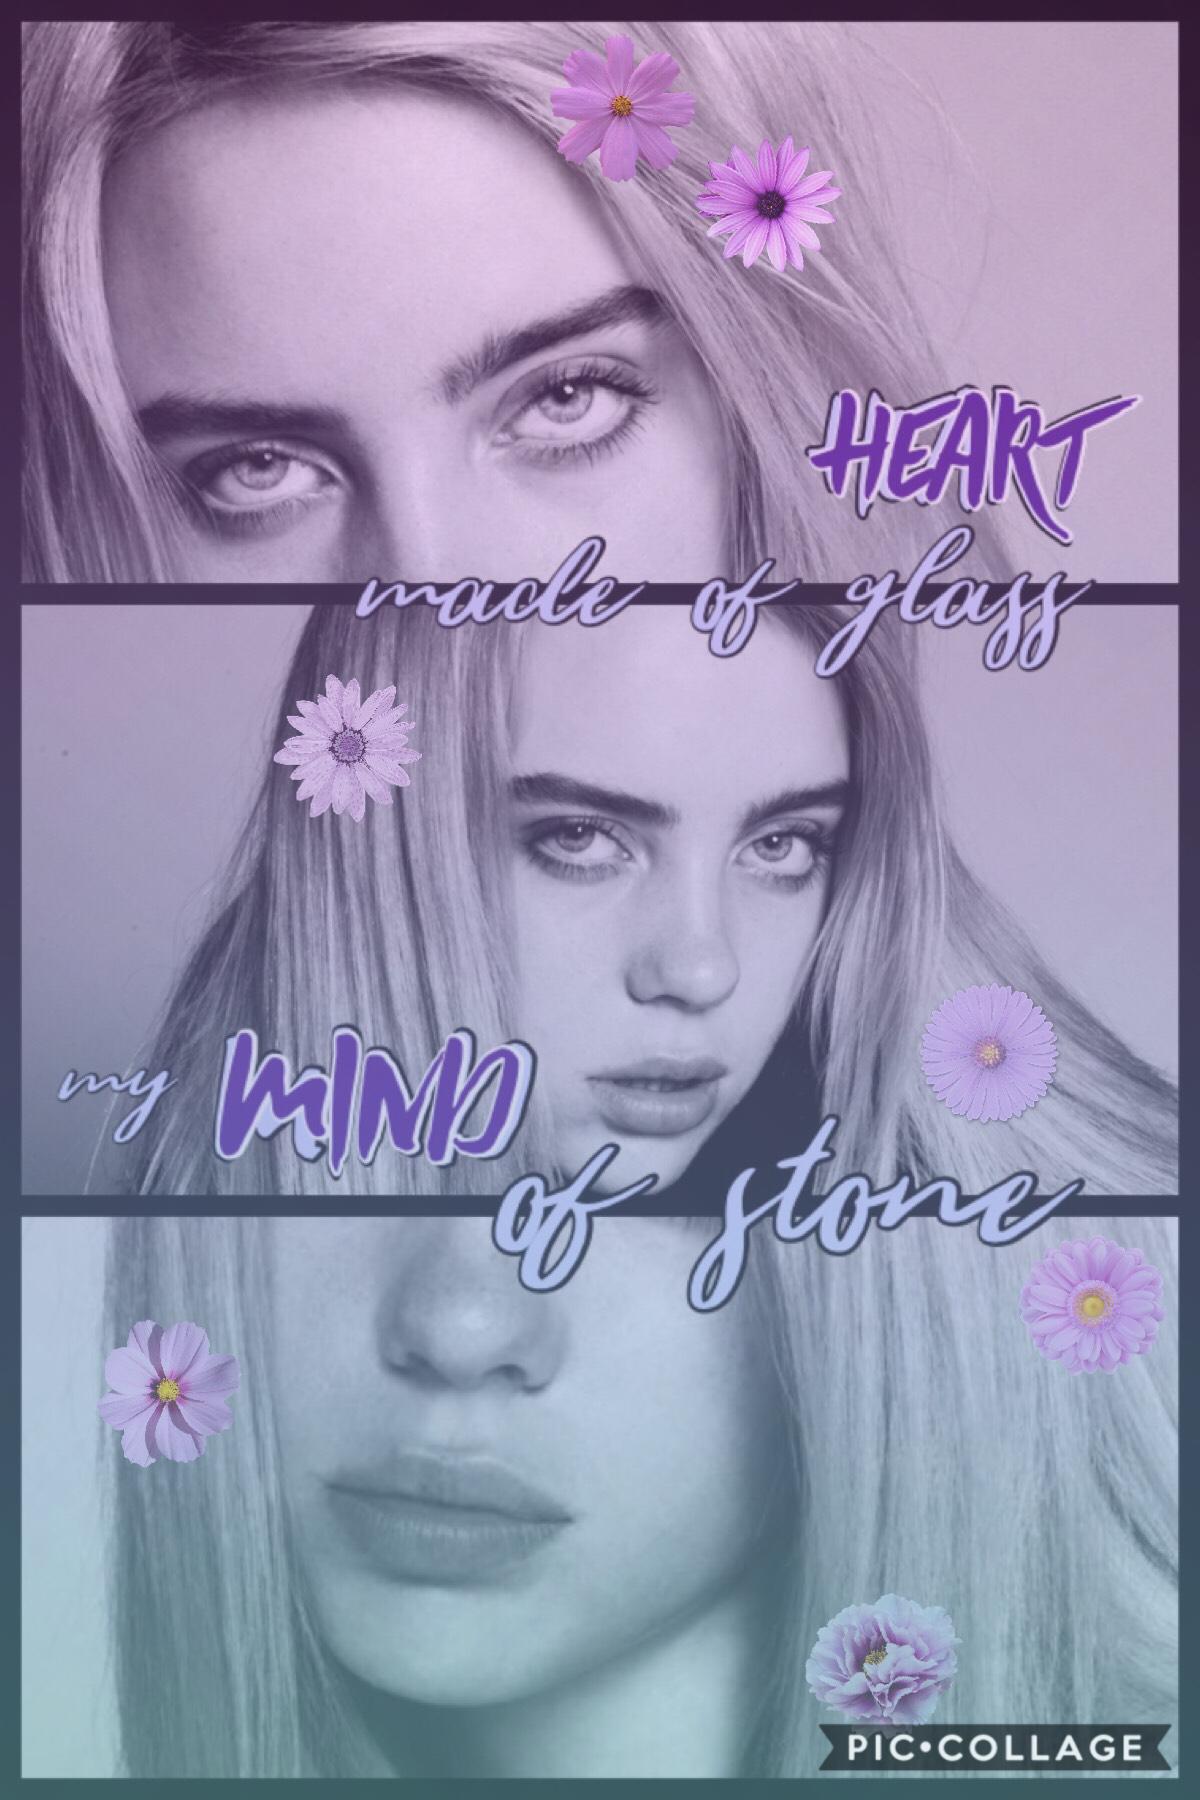 so i’m not rly a hugeee fan of billie but i LOVE this song and her voice is gorgeous and so is she and uhhhh yeah anyways this was fun to make 